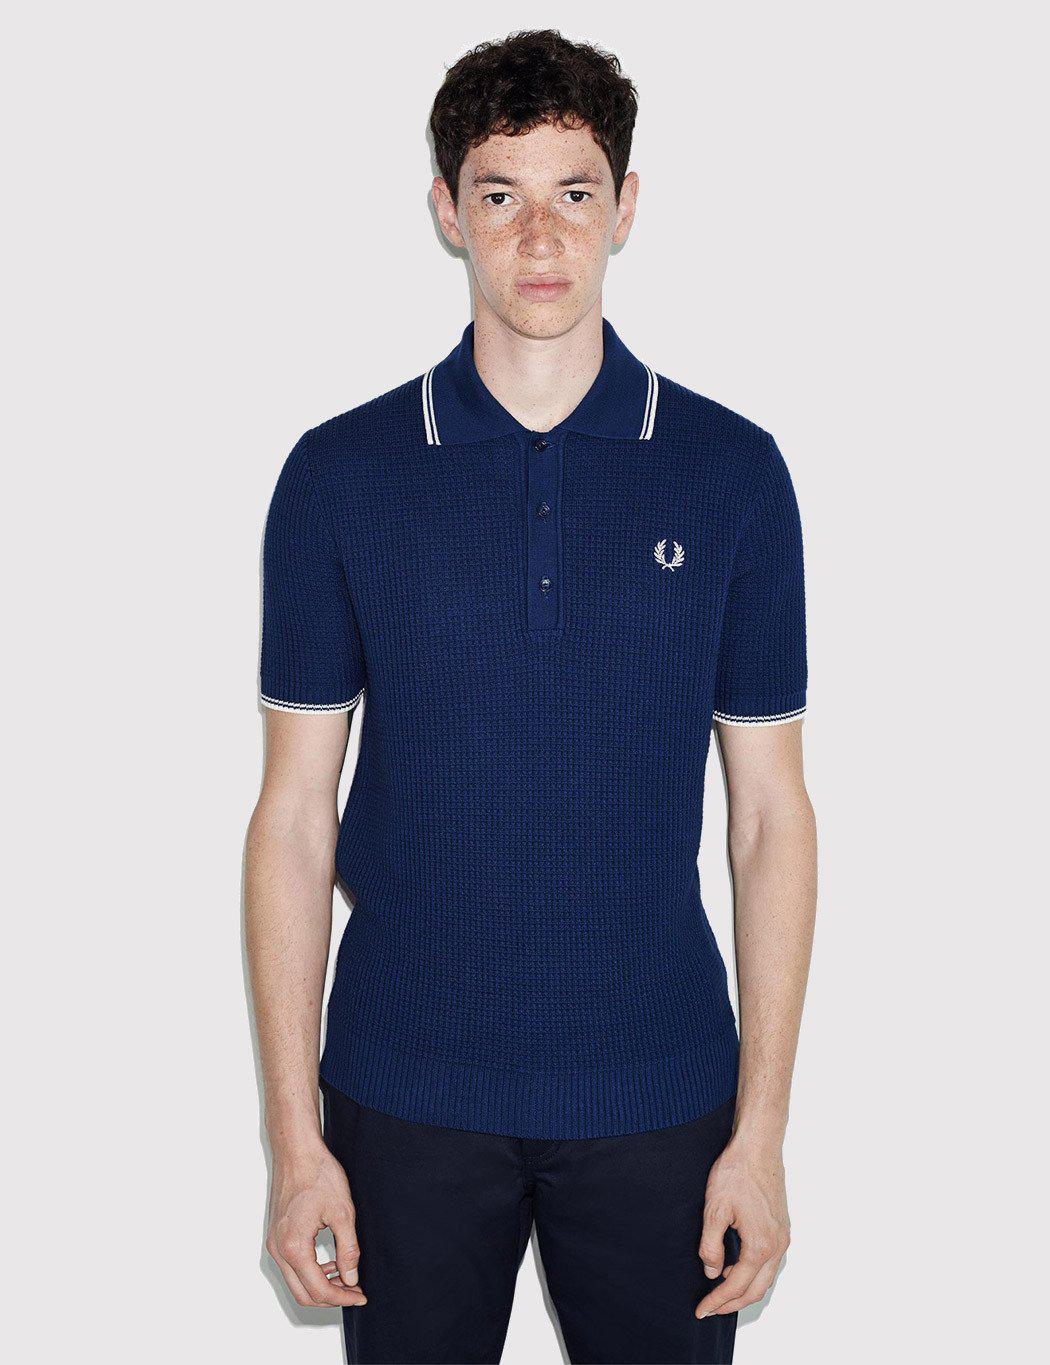 Lyst - Fred Perry Textured Knitted Polo Shirt in Blue for Men